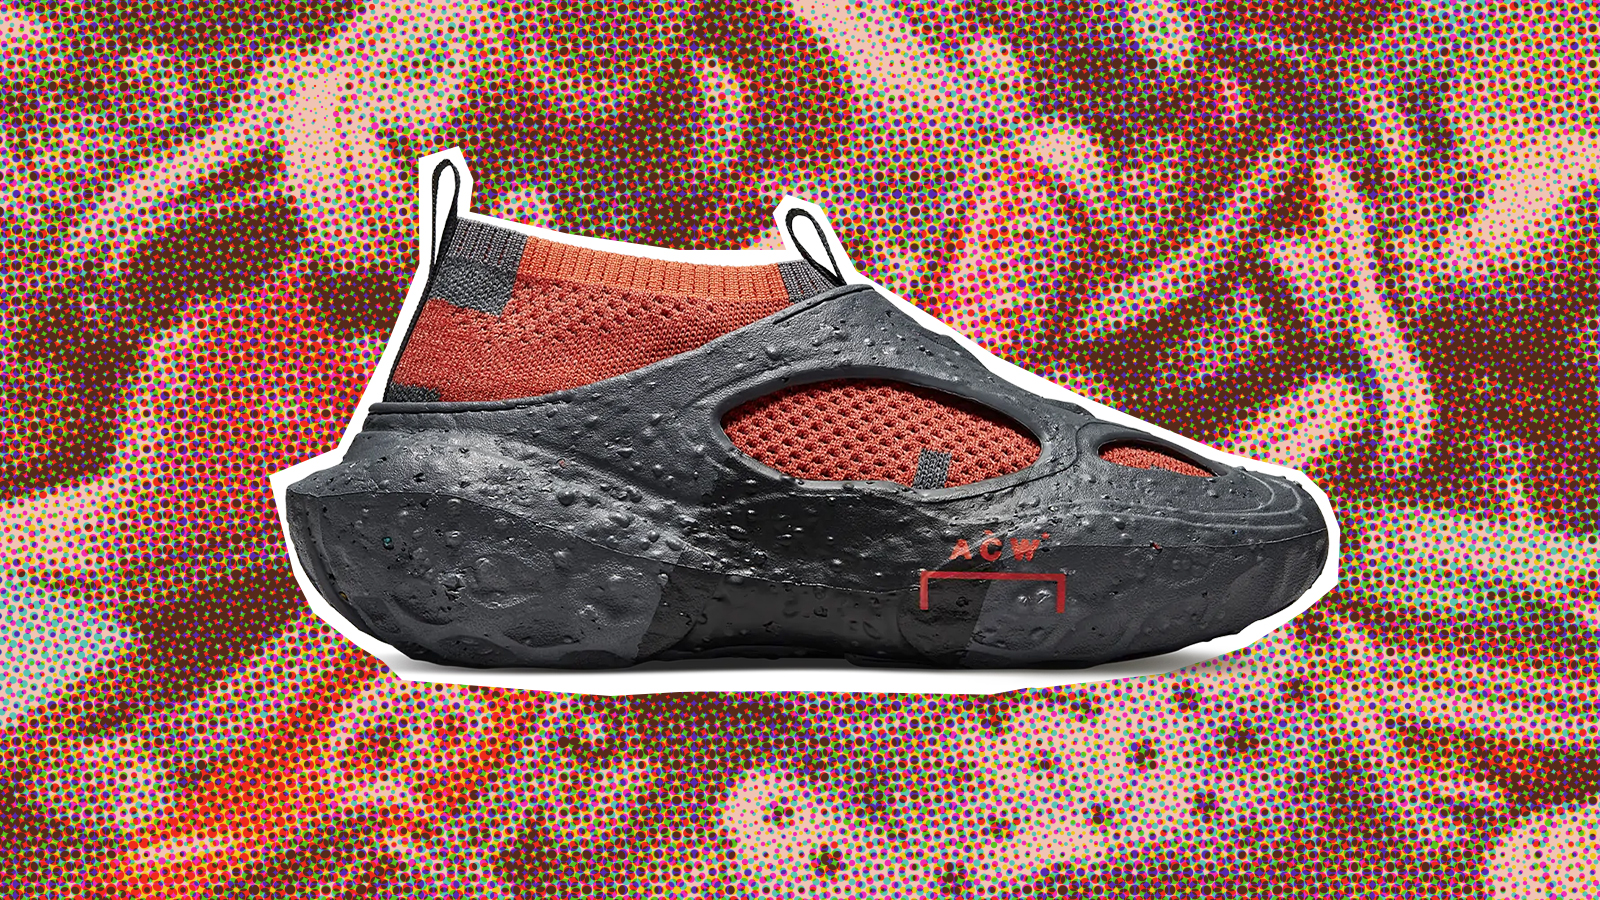 New Balance unveils the world's ugliest shoes